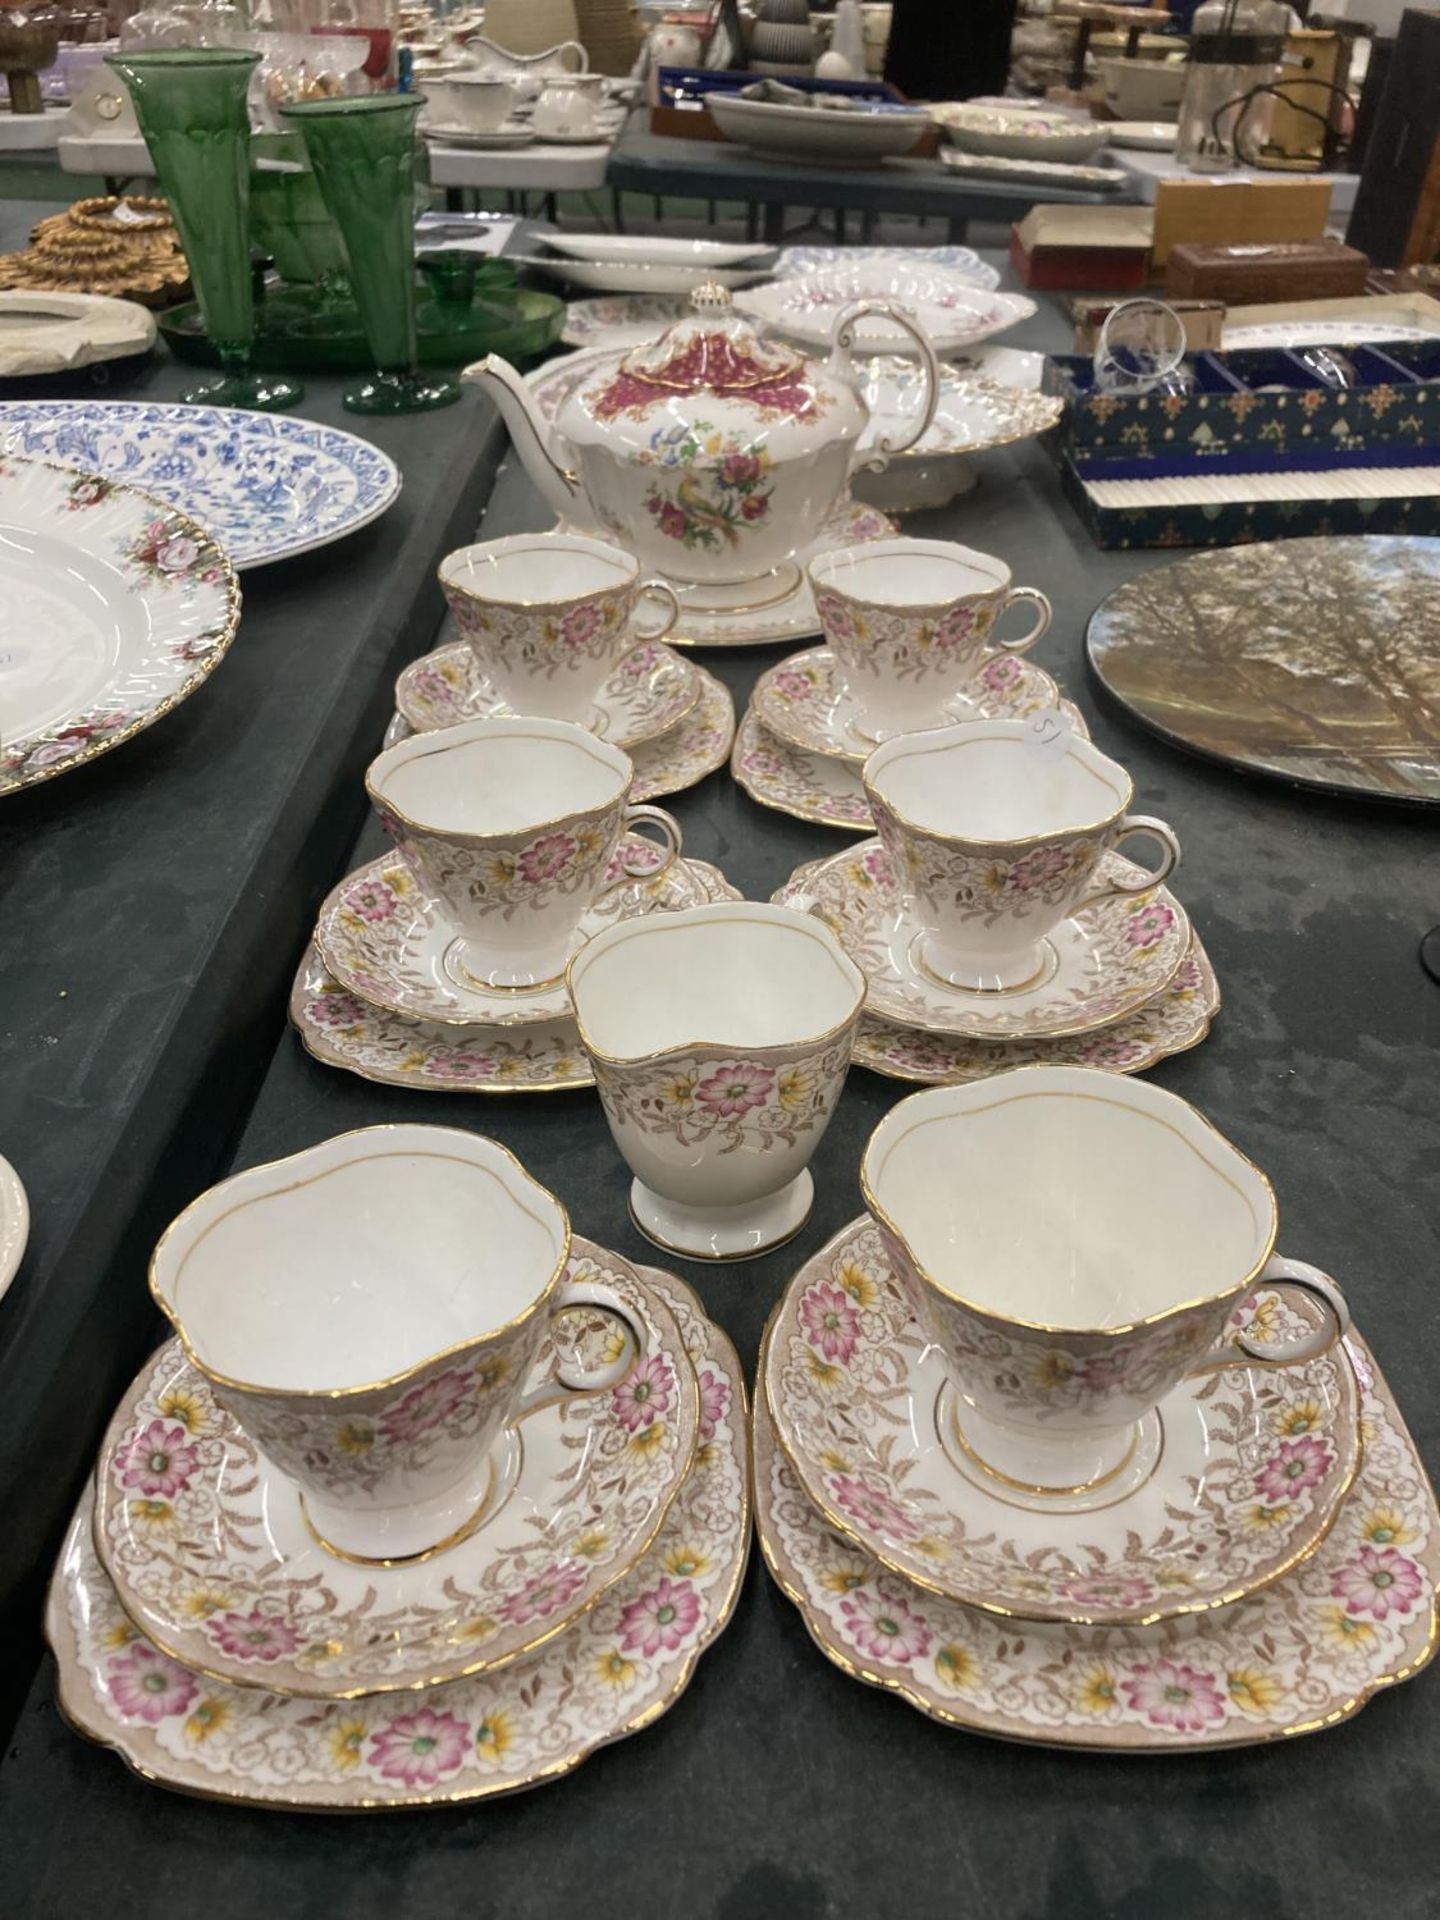 A WINDSOR SET OF SIX TRIOS,CAKE PLATE AND A CREAM JUG IN A FLORAL PATTERN PLUS A PARAGON 'BIRD OF